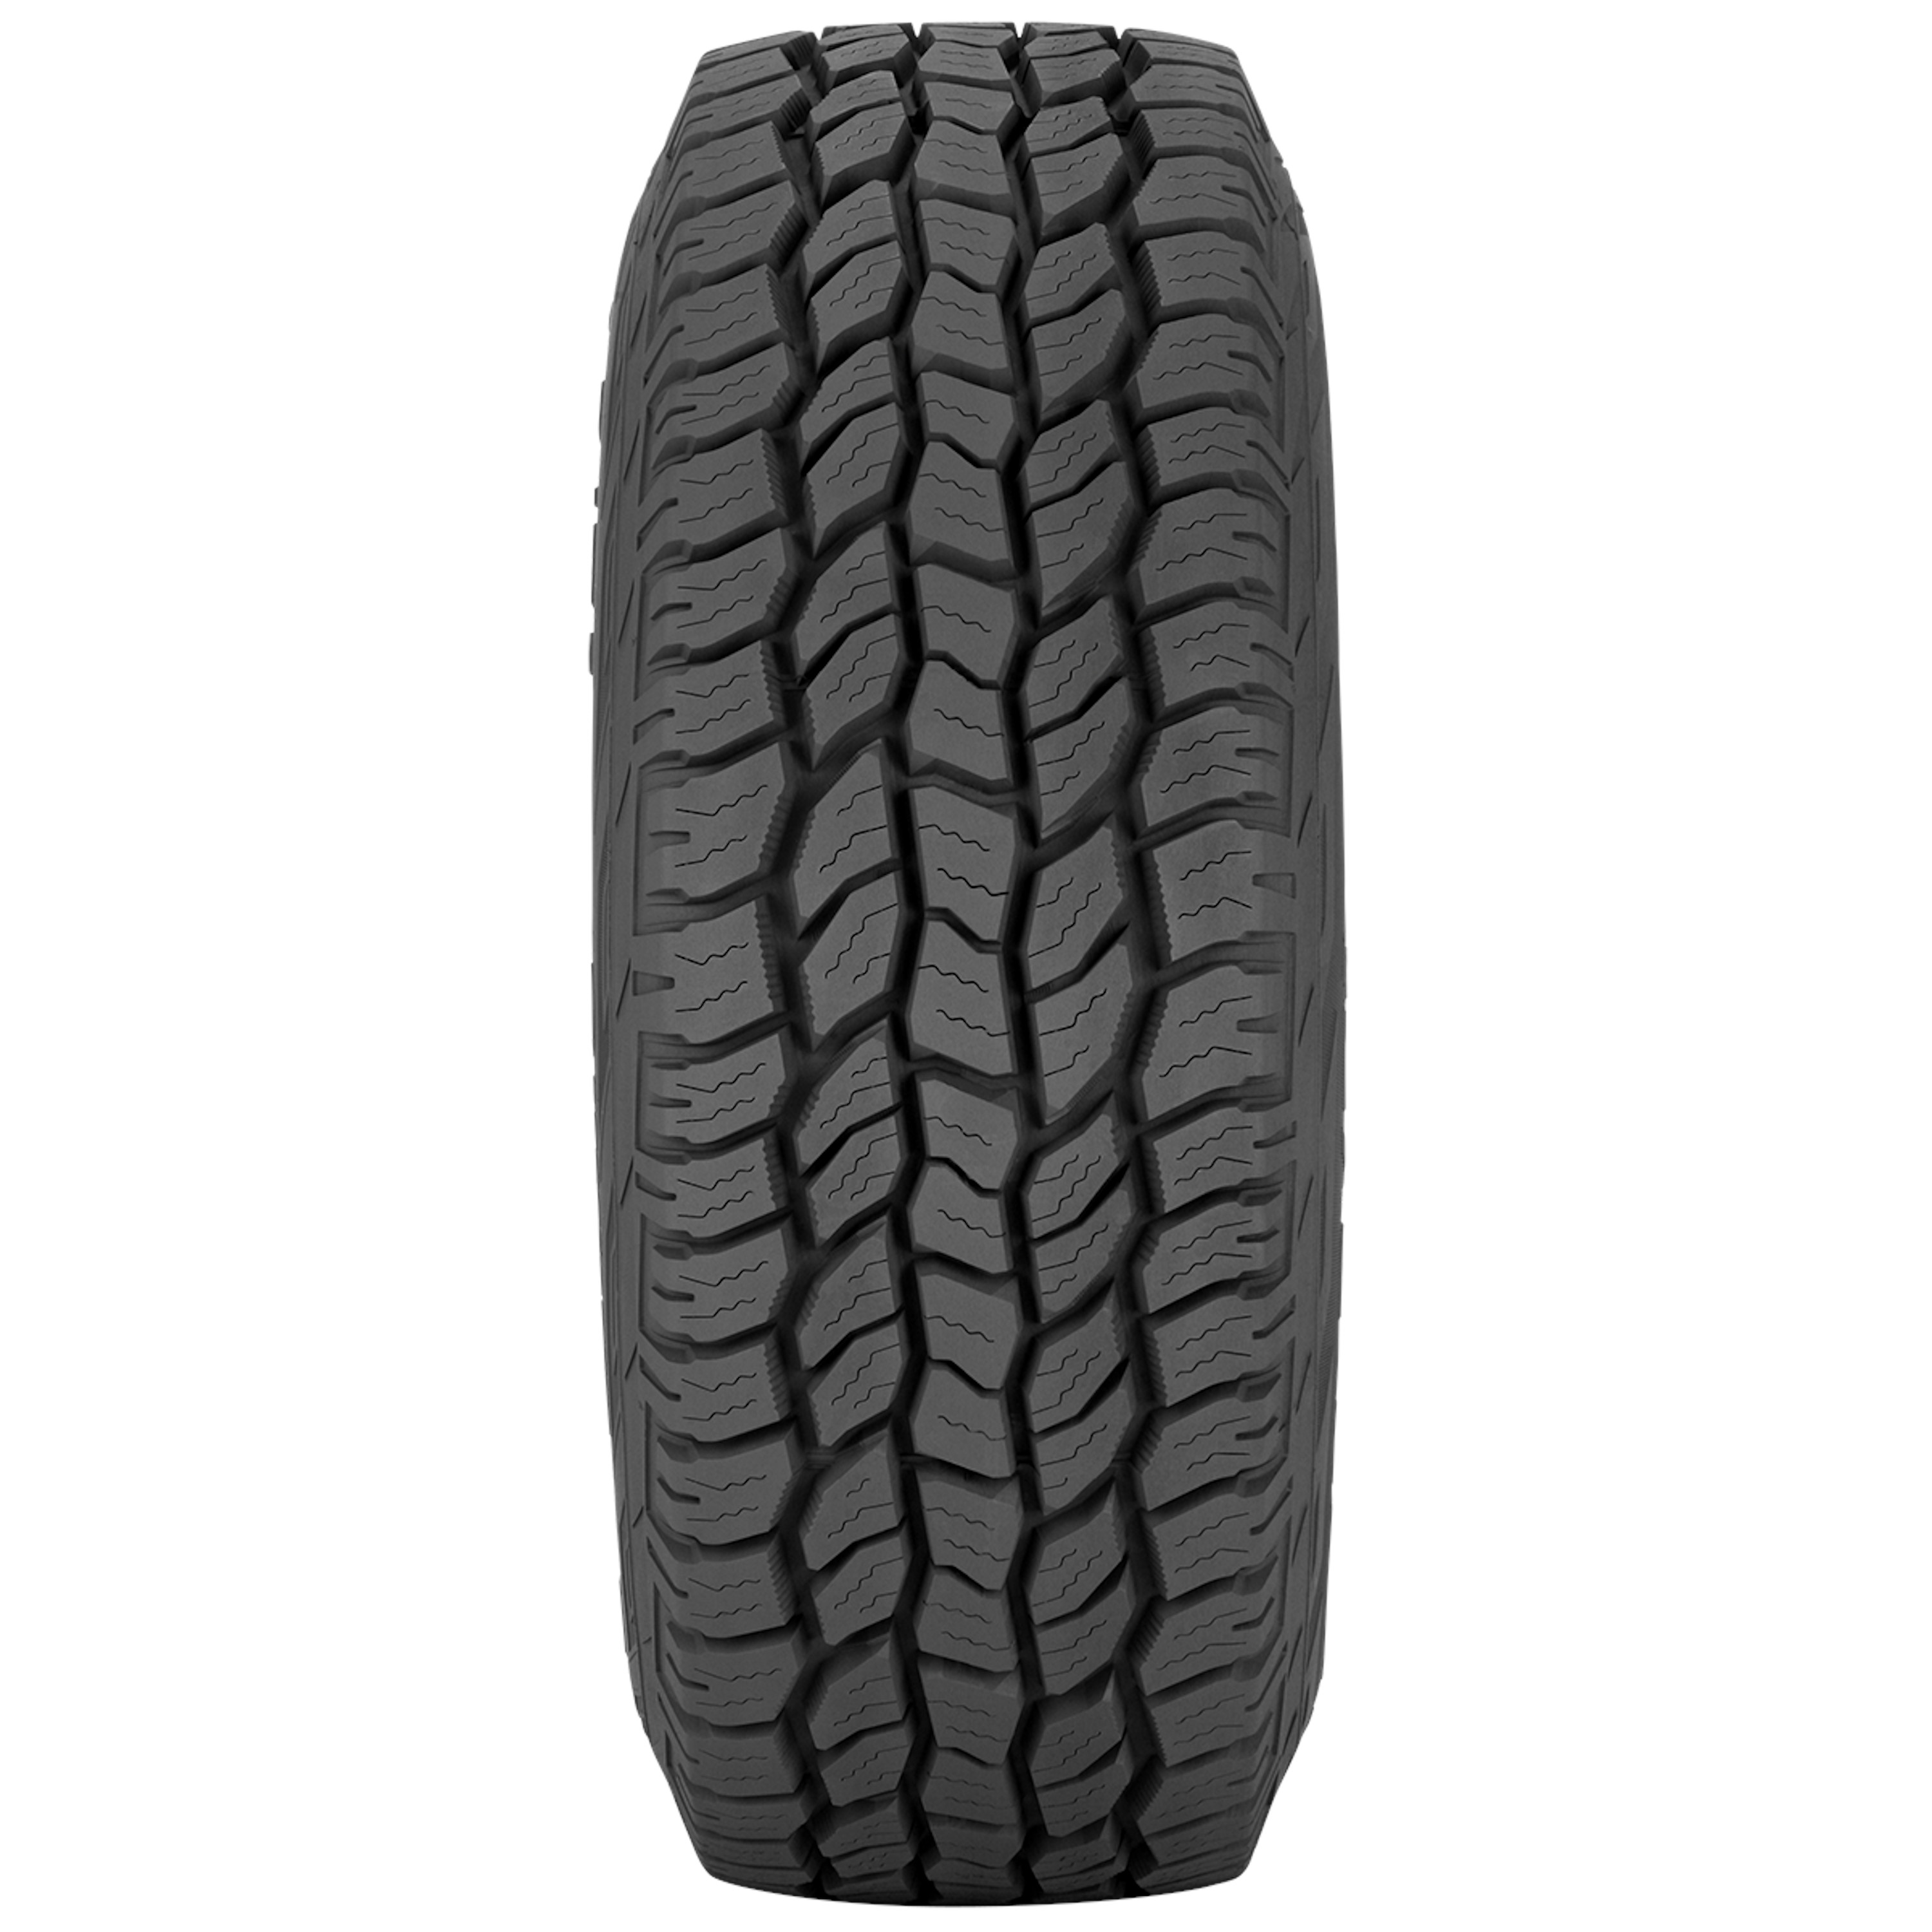 Cooper Discoverer A/T All-Season 275/55R20 117T Tire Fits: 2014-18 Chevrolet Silverado 1500 High Country, 2011-18 GMC Sierra 1500 Denali - image 4 of 8